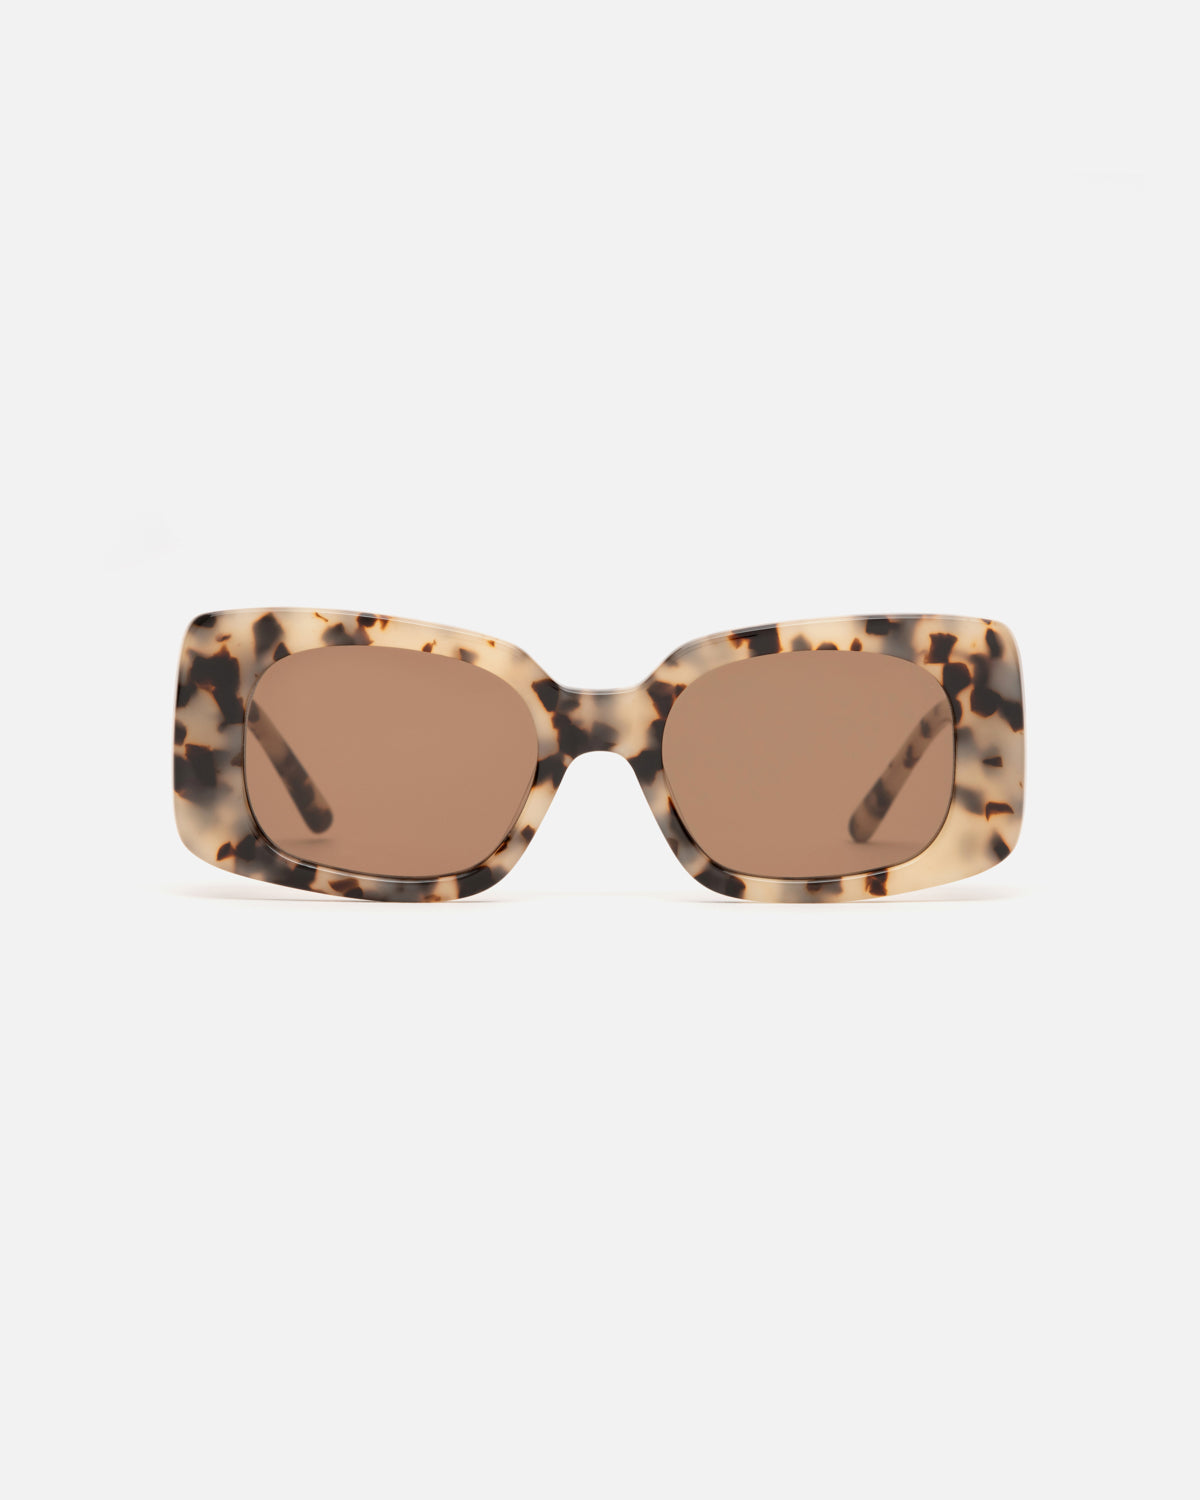 Lu Goldie Coco square Sunglasses in choc tortoise shell acetate with brown lenses, front